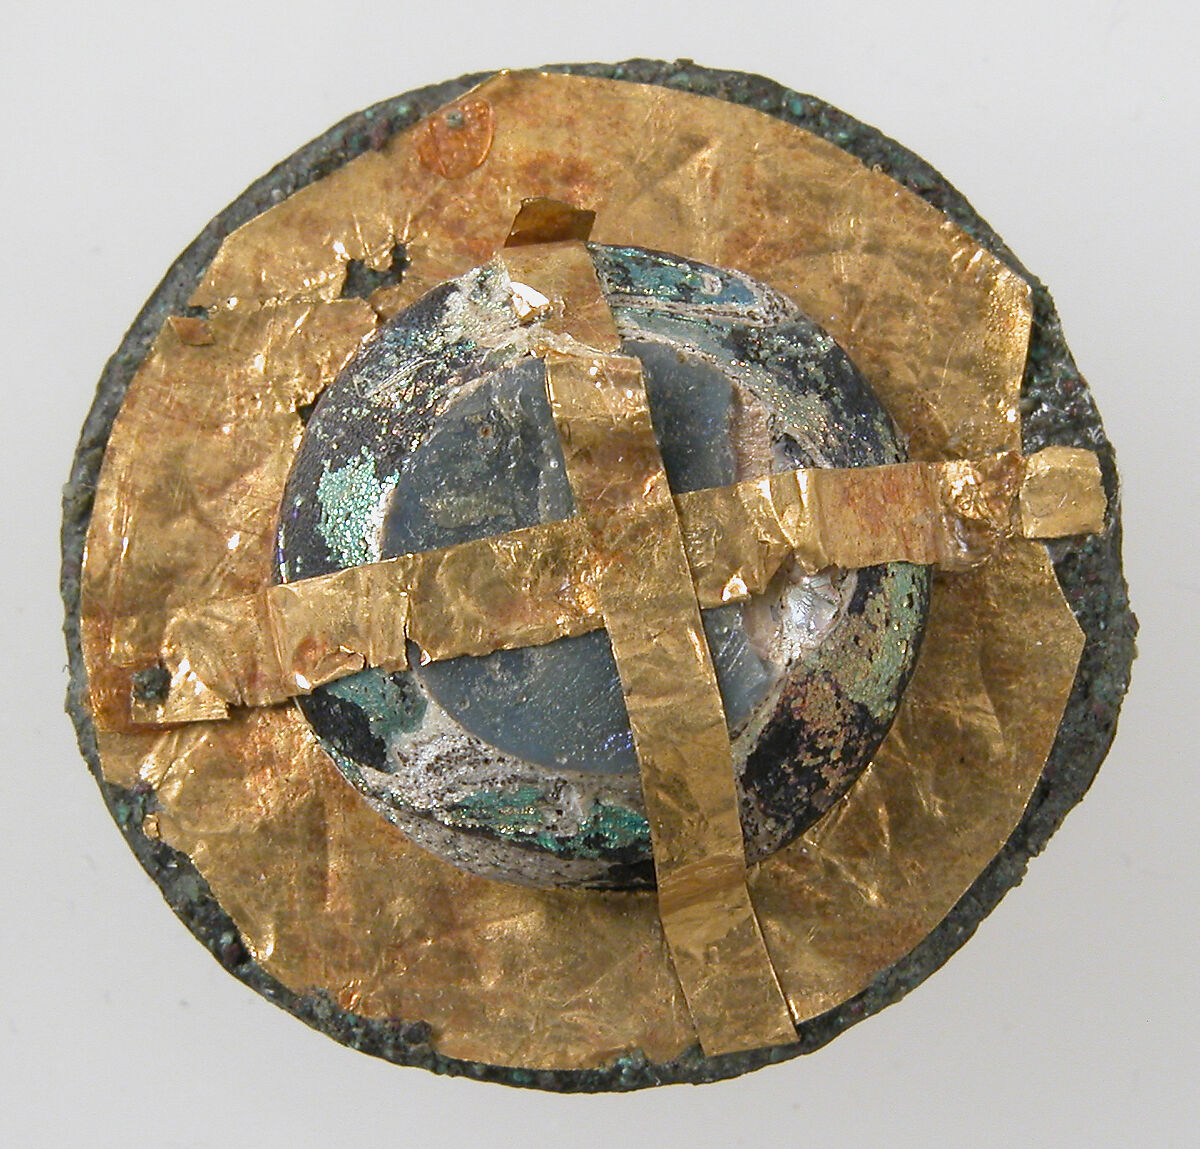 Disk Brooch, Copper alloy coated with gold foil, glass paste, Frankish 